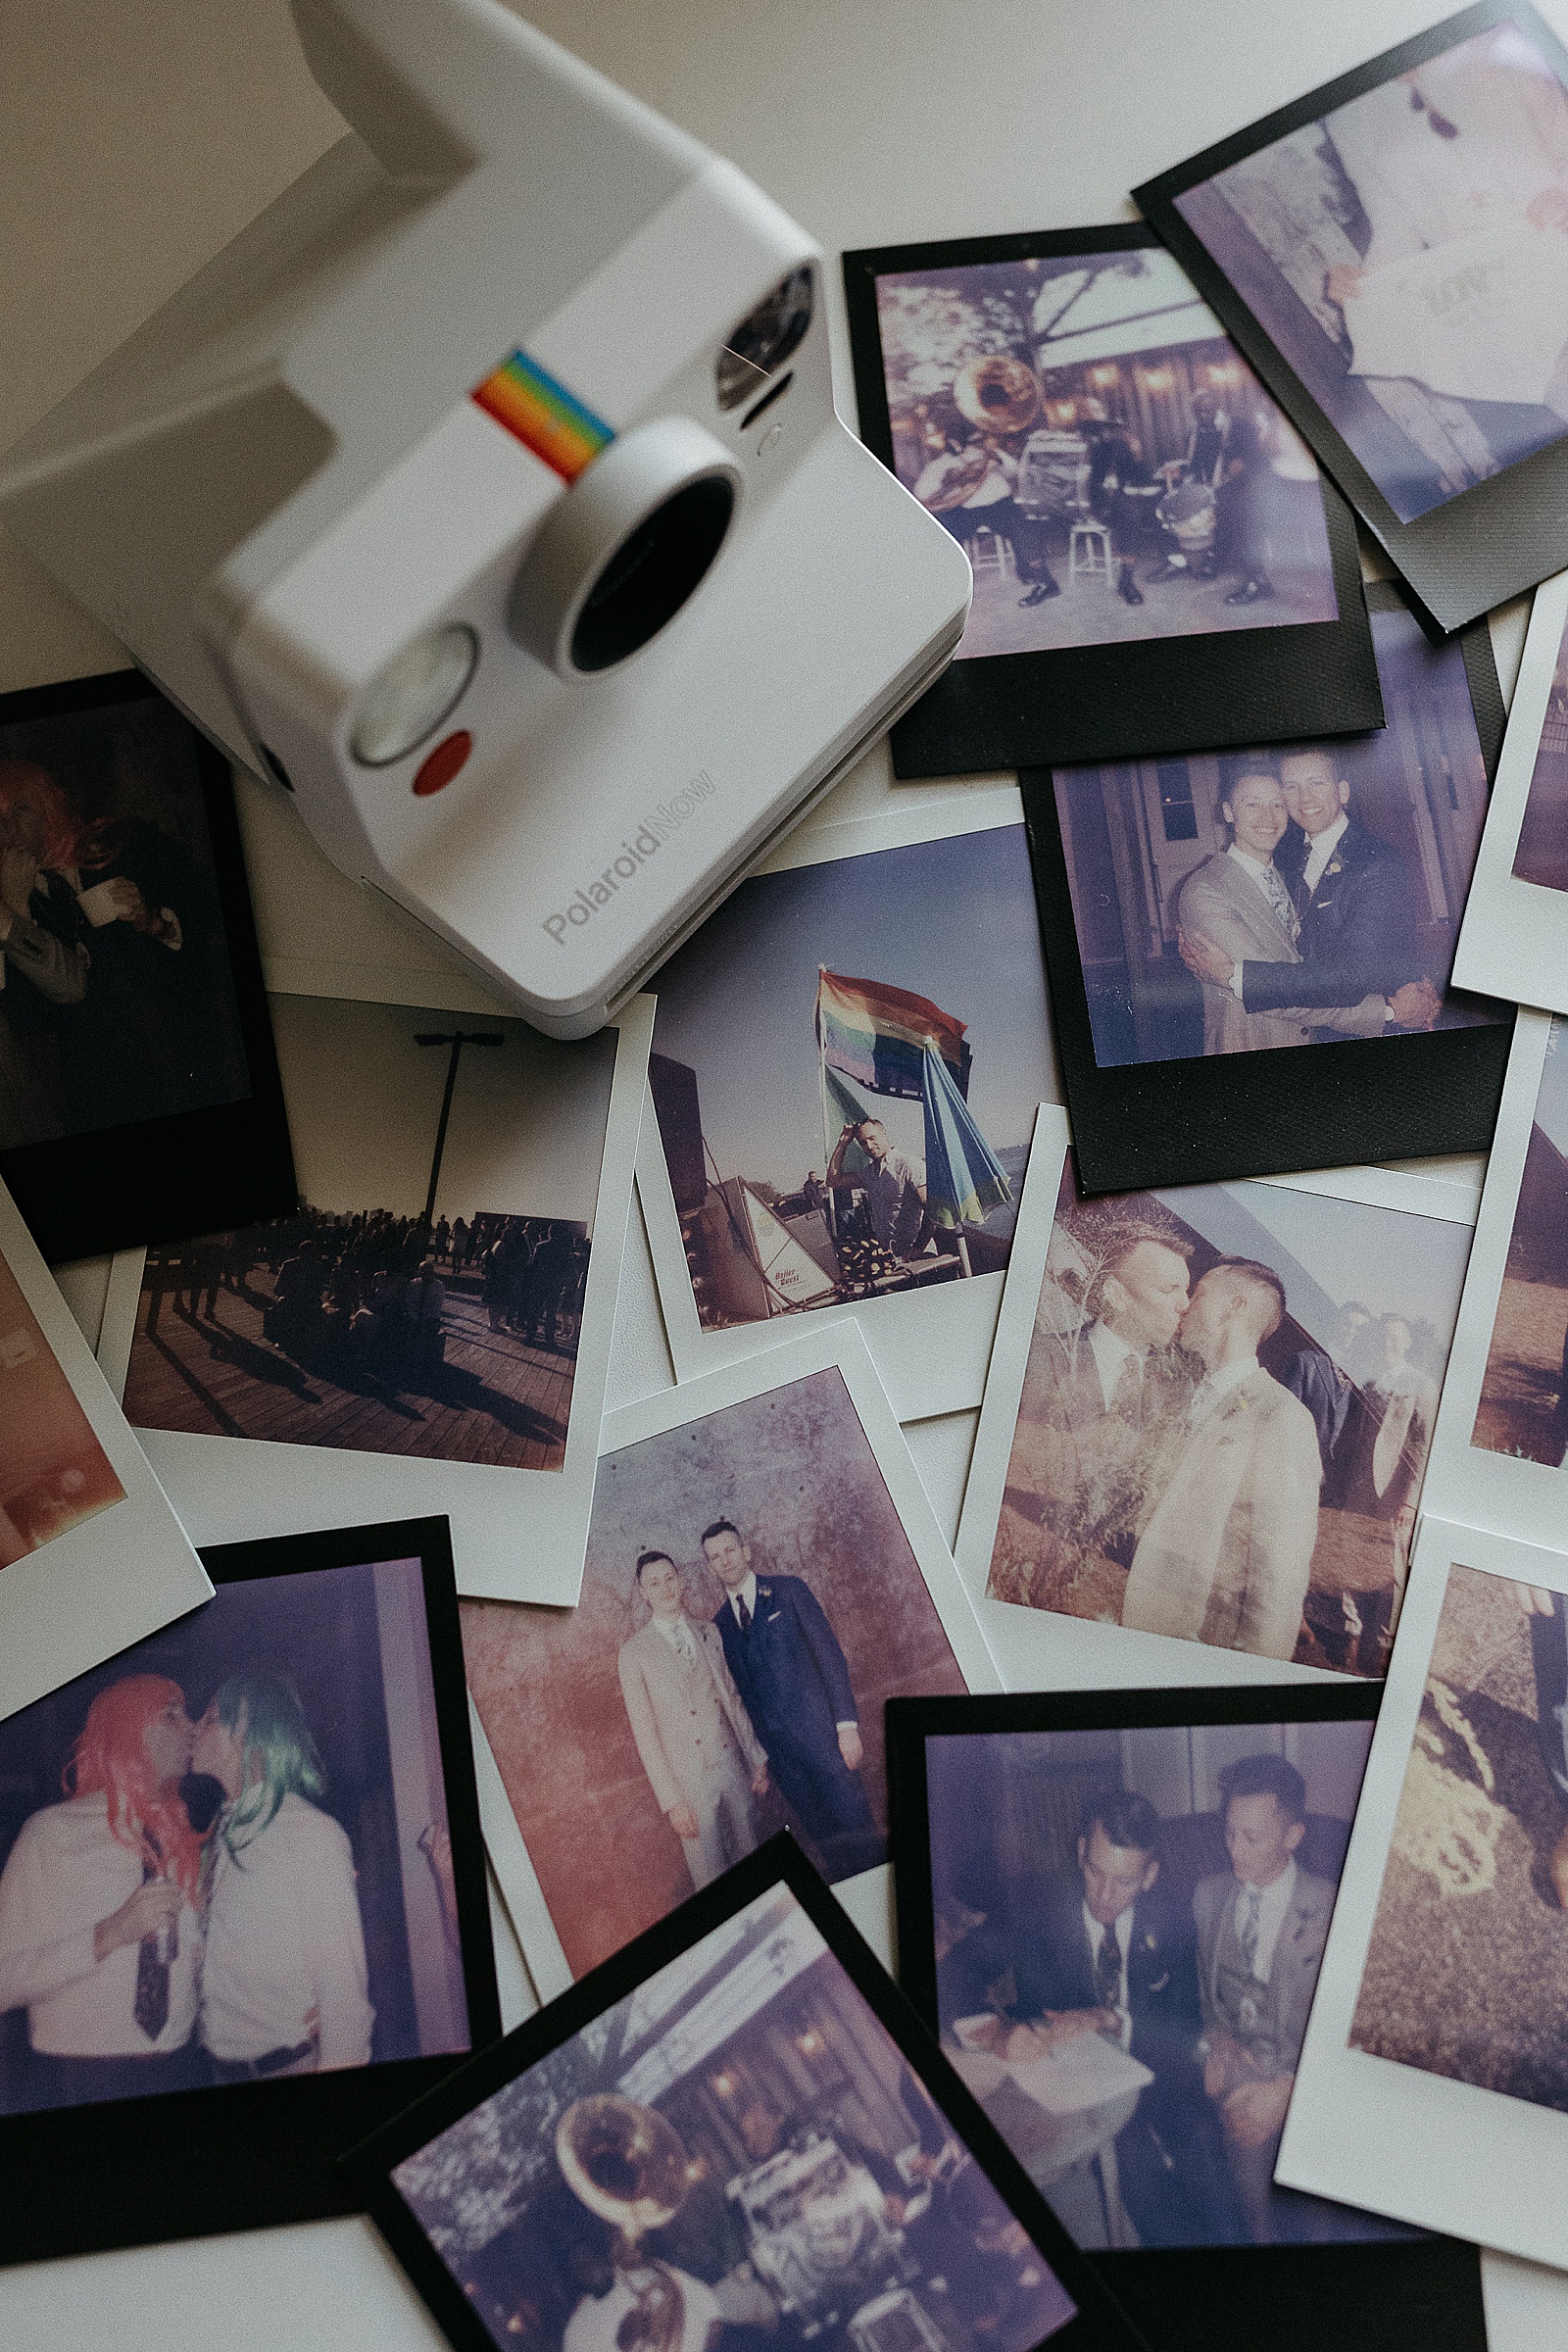 The best instant film camera sits on a stack of Polaroids